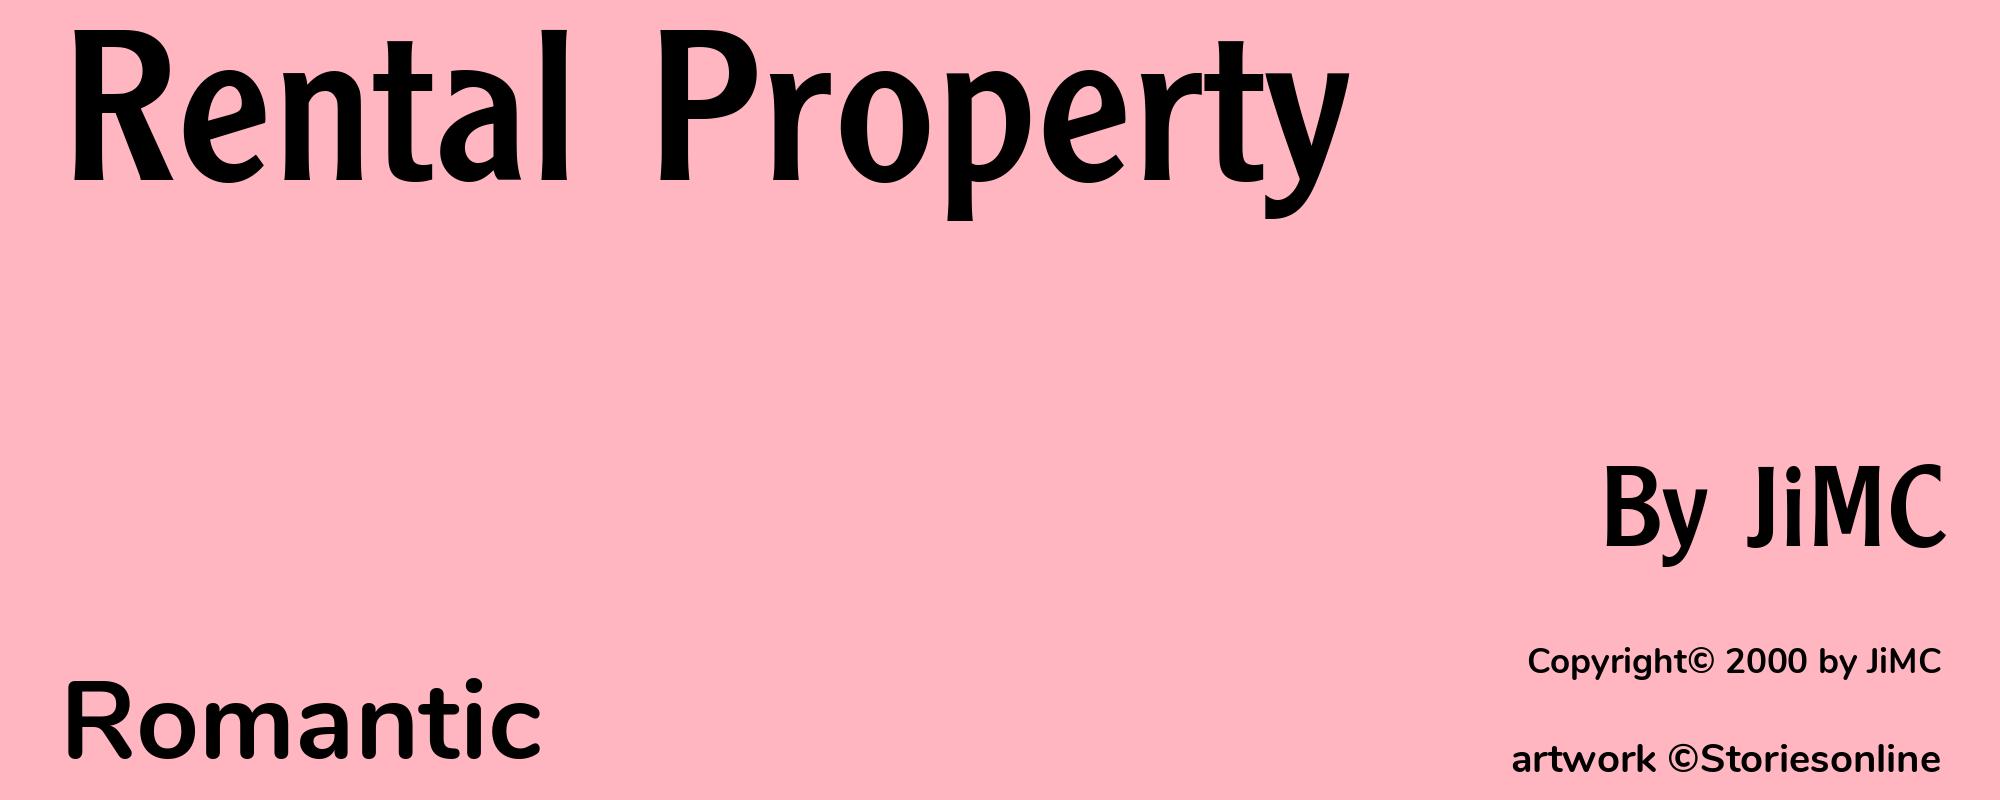 Rental Property - Cover